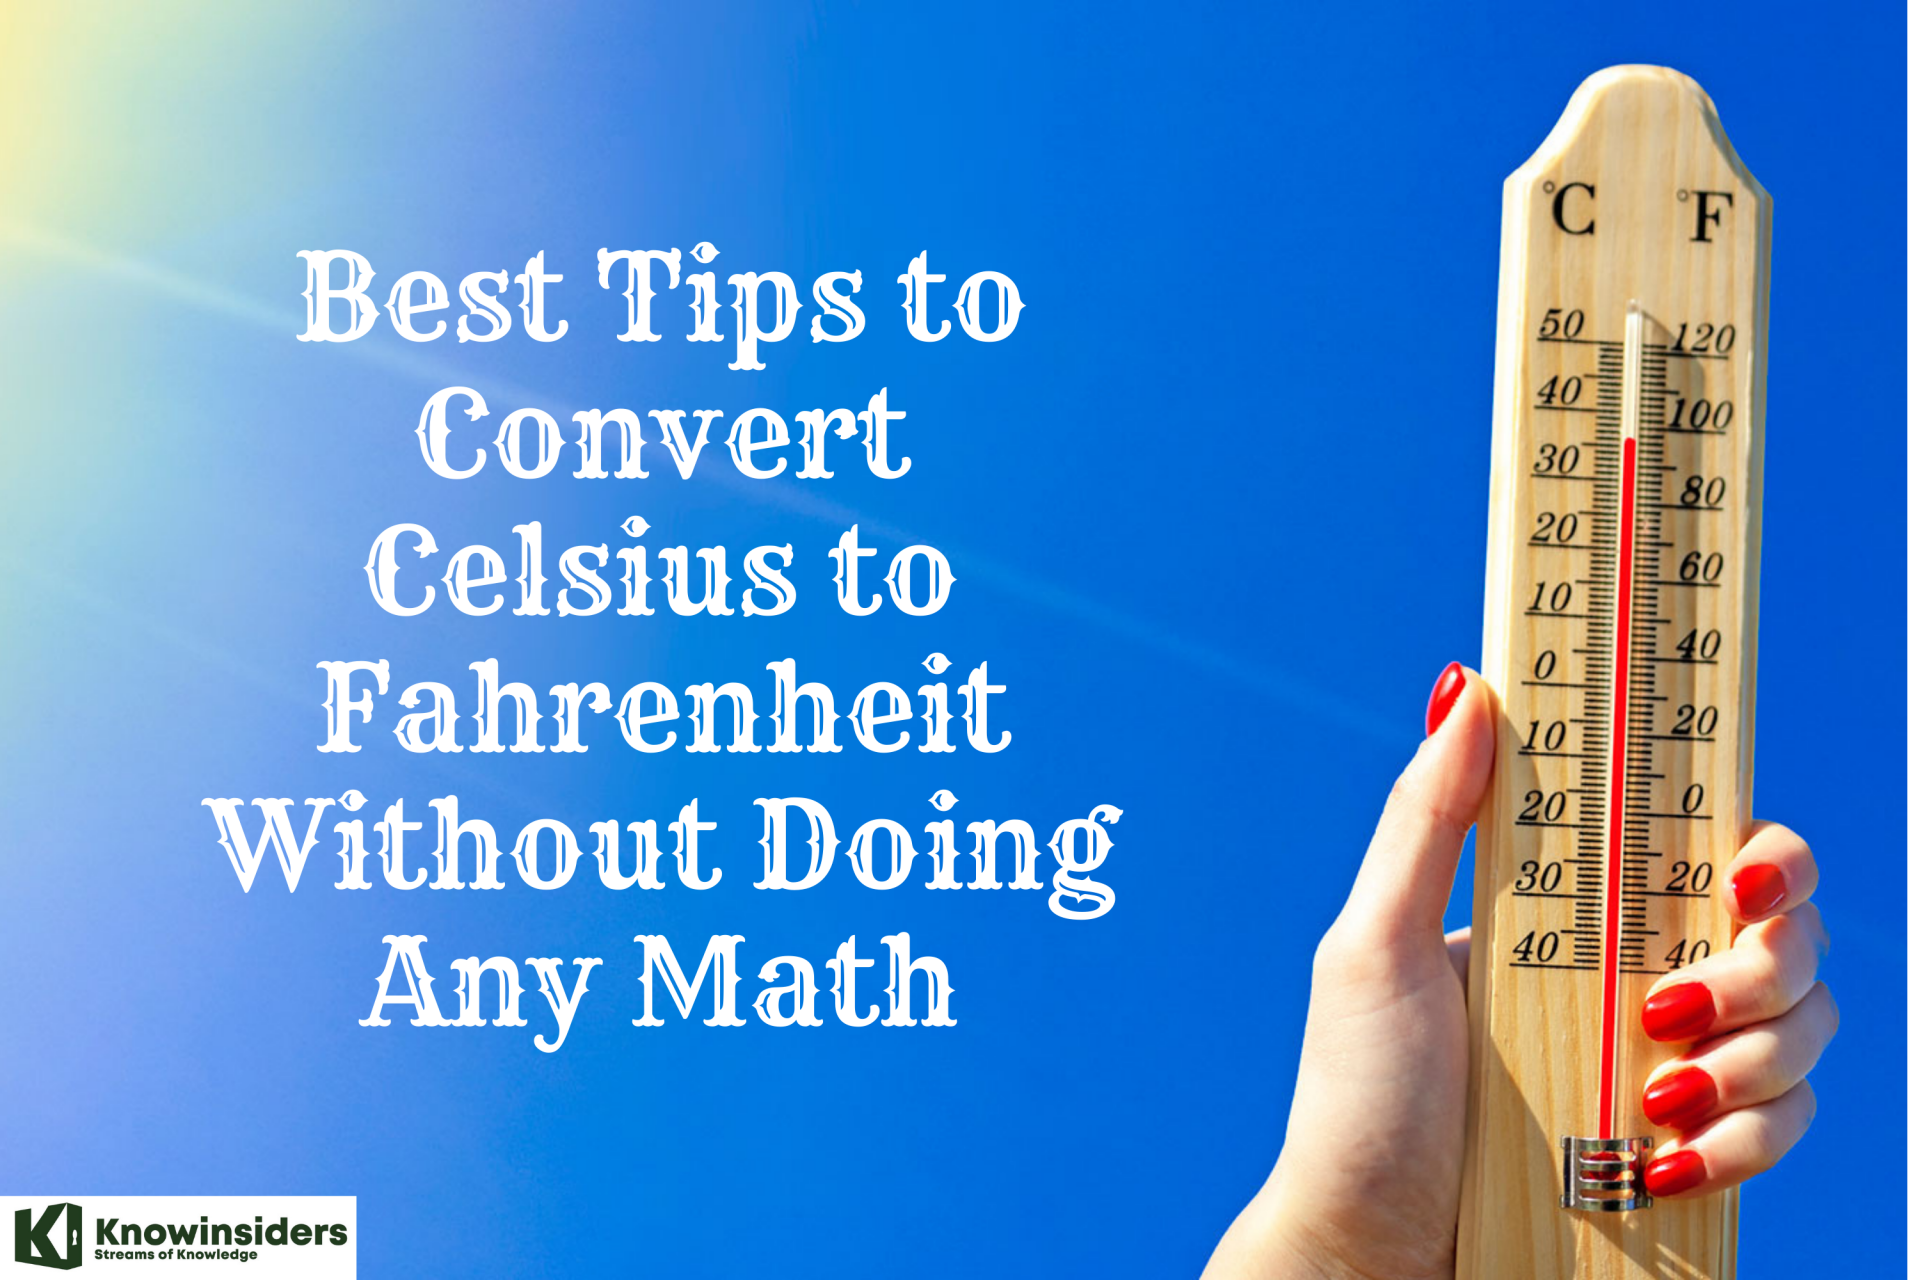 Best Tips to Convert Celsius to Fahrenheit Without Doing Any Math